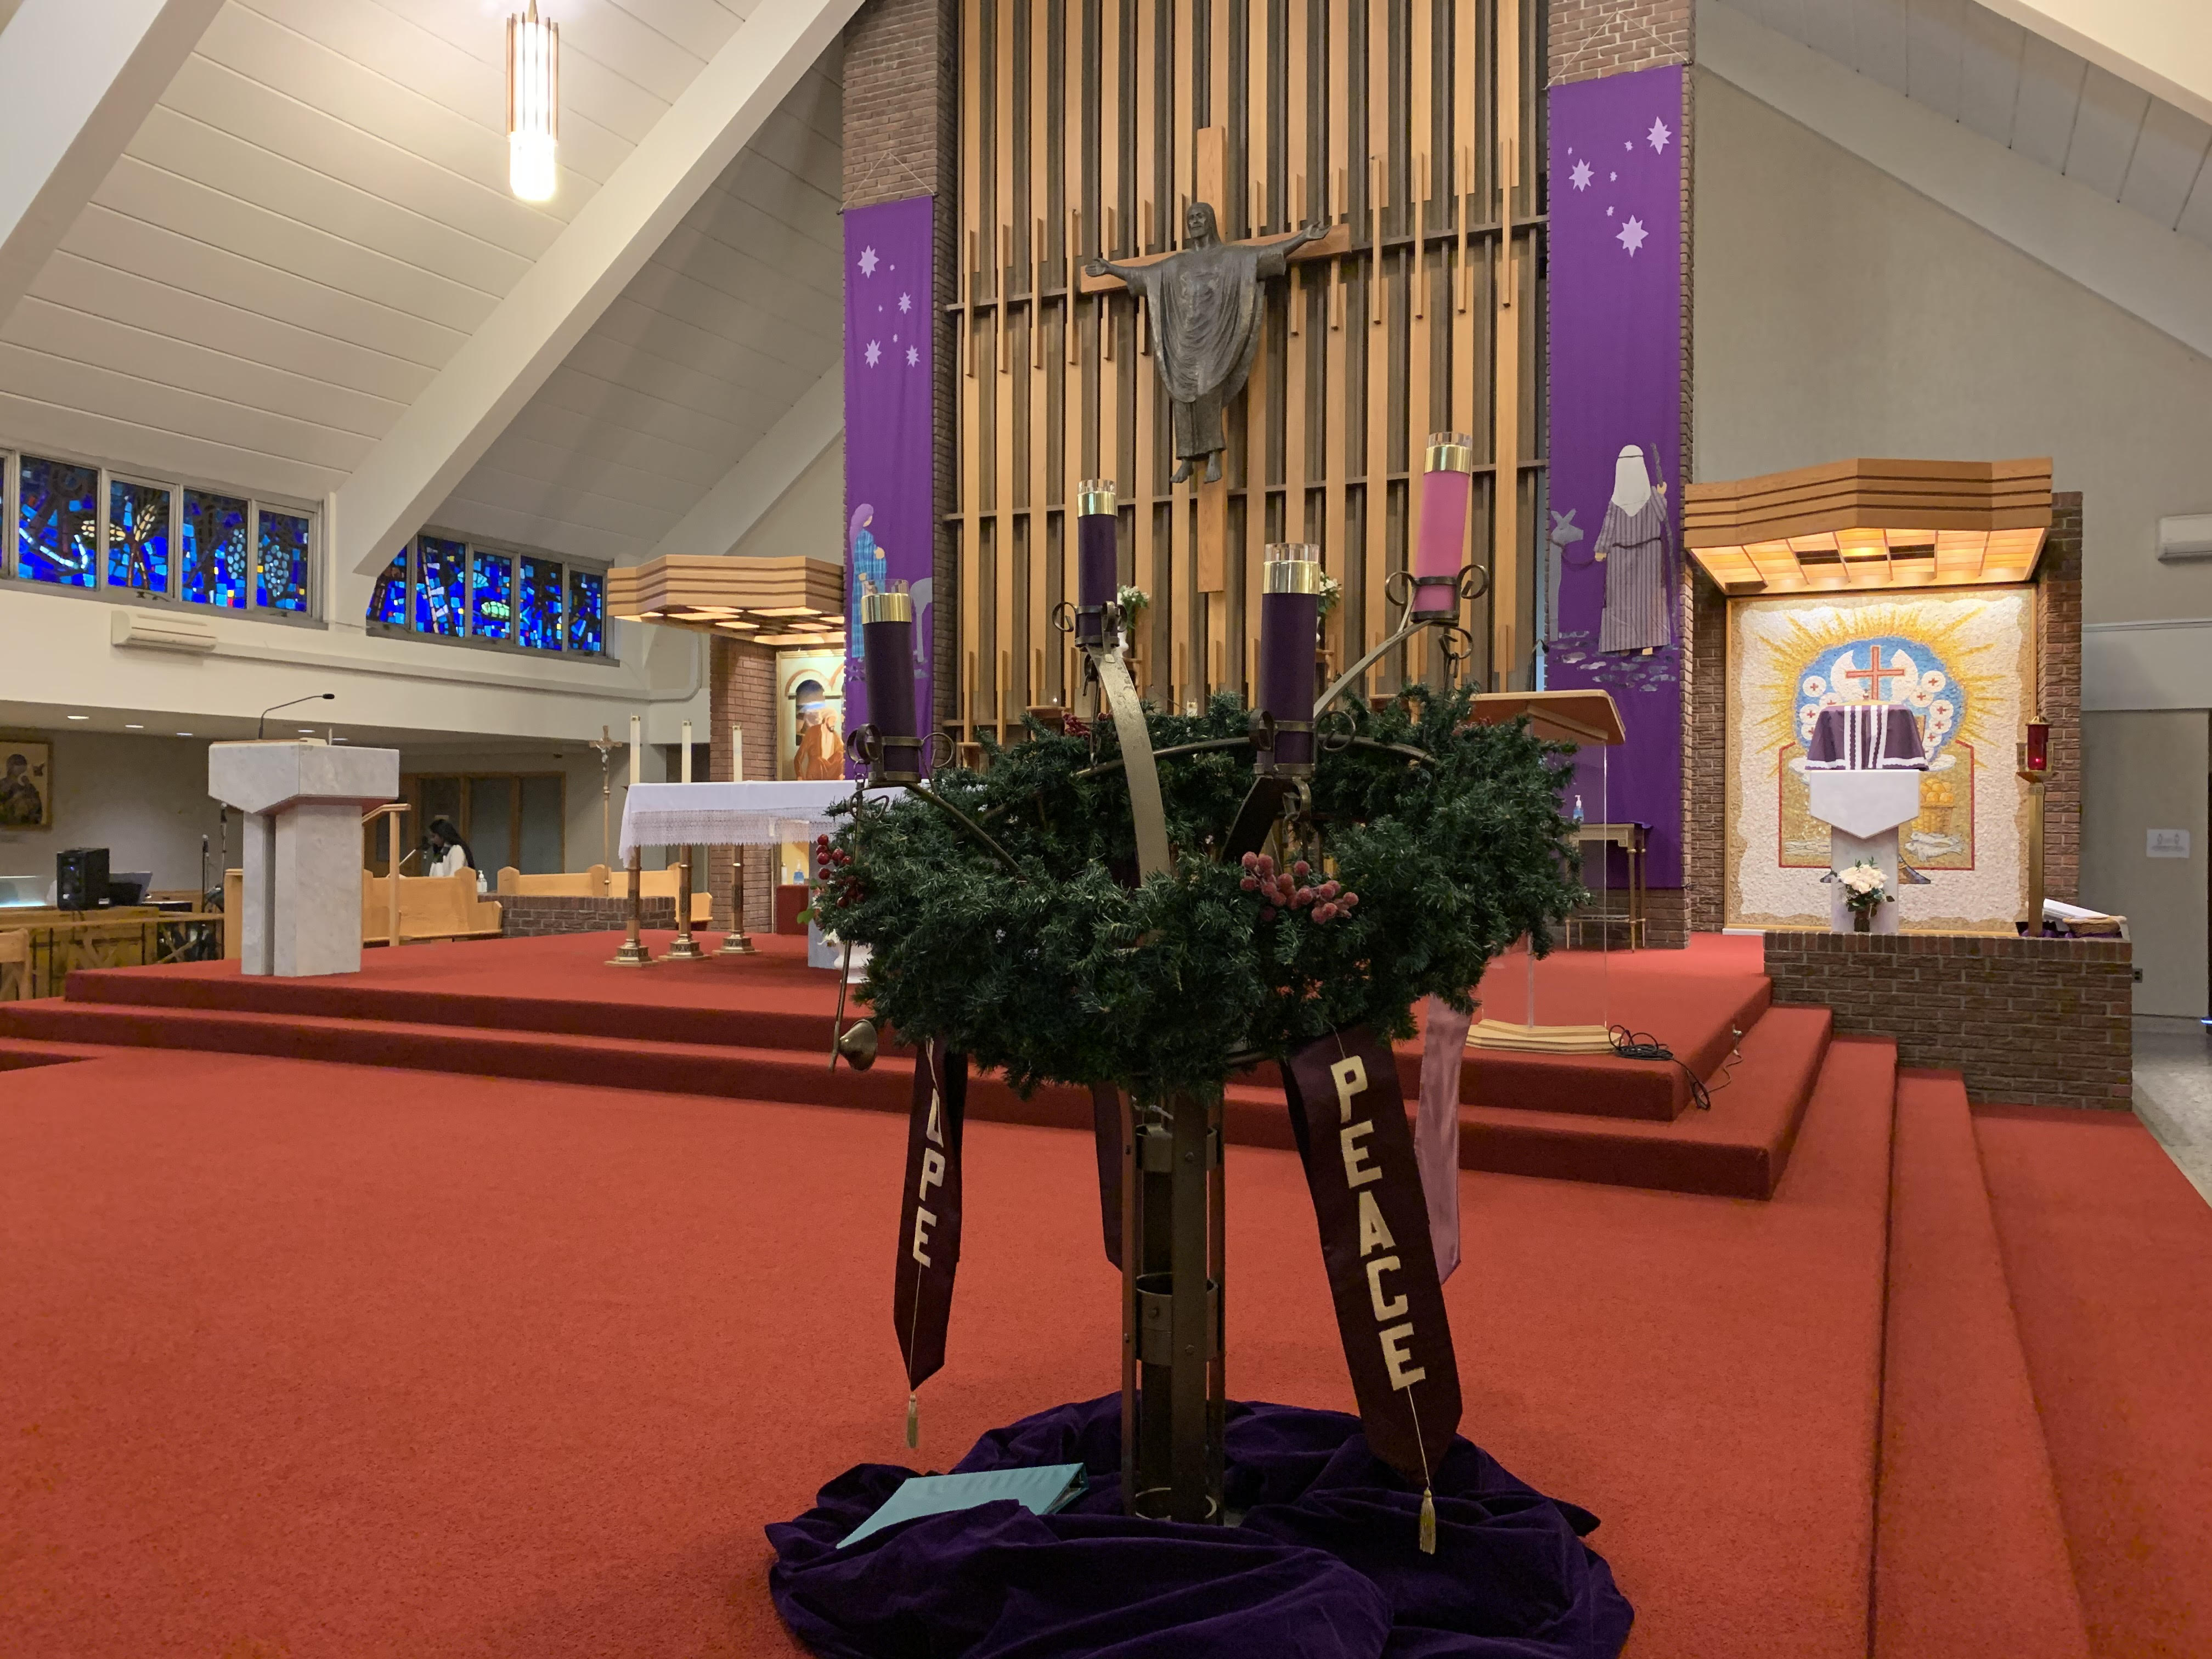 The altar decorated for Advent season